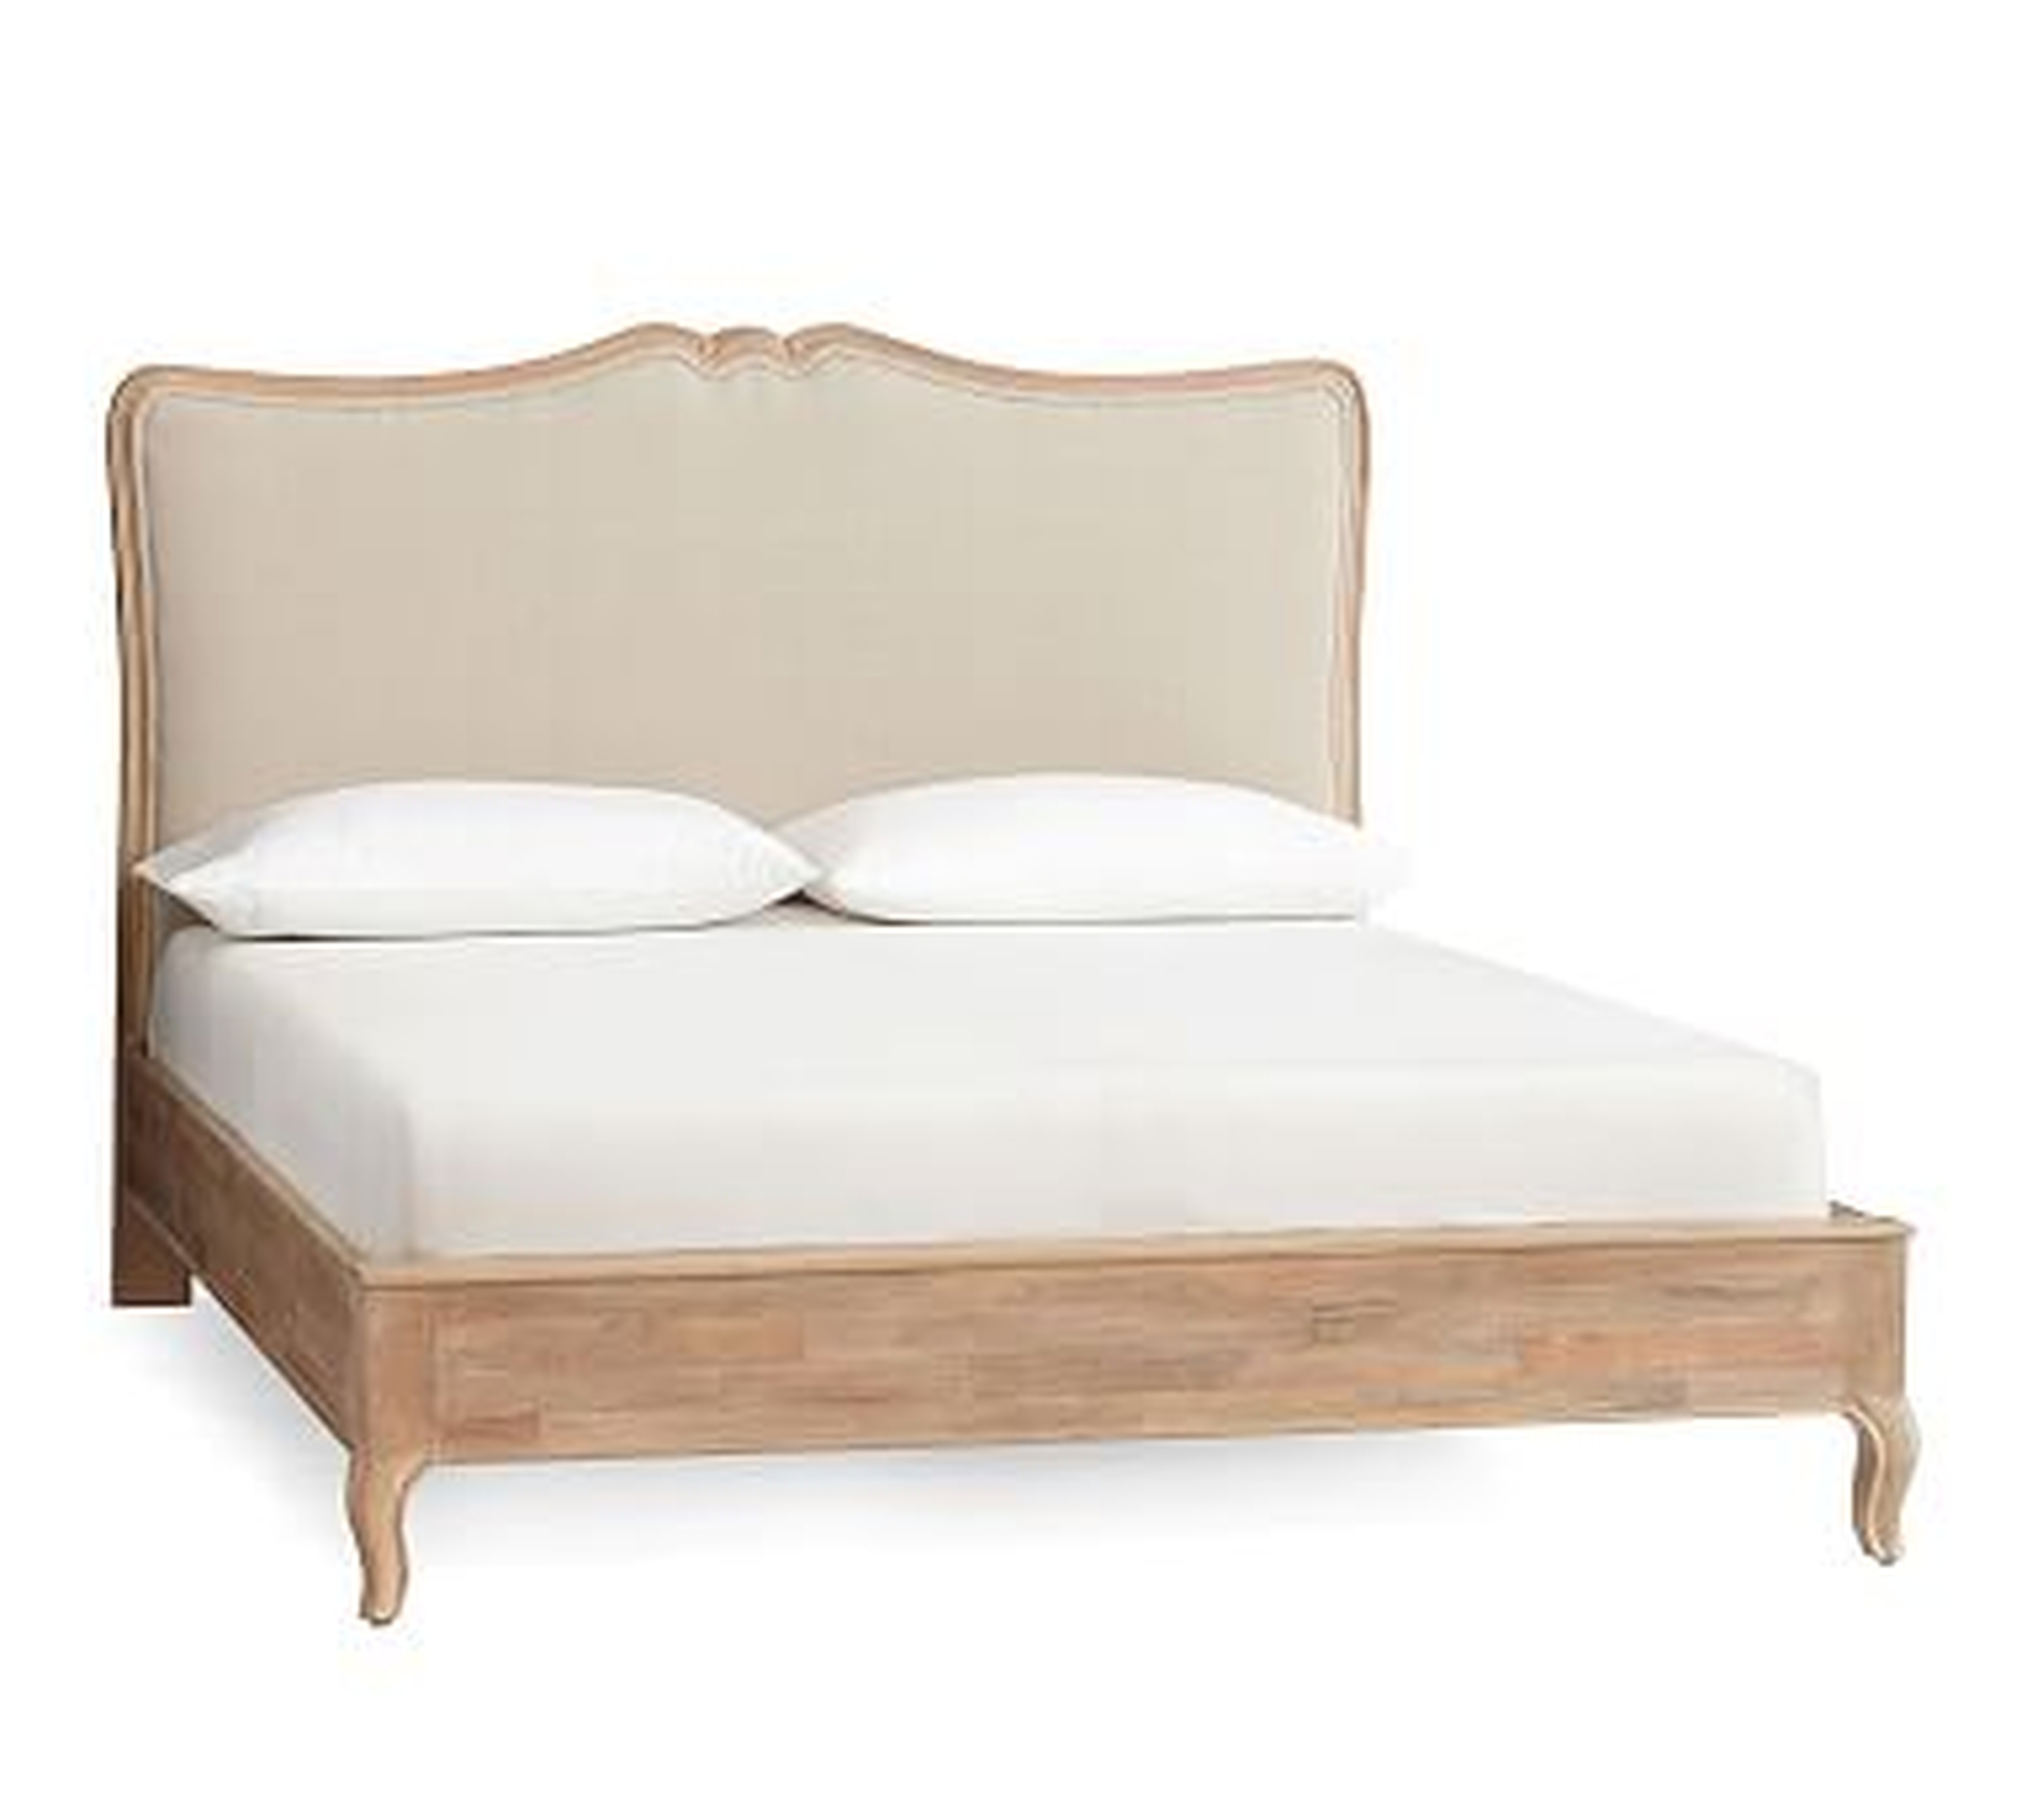 Claremont Bed, Praline, King - Pottery Barn